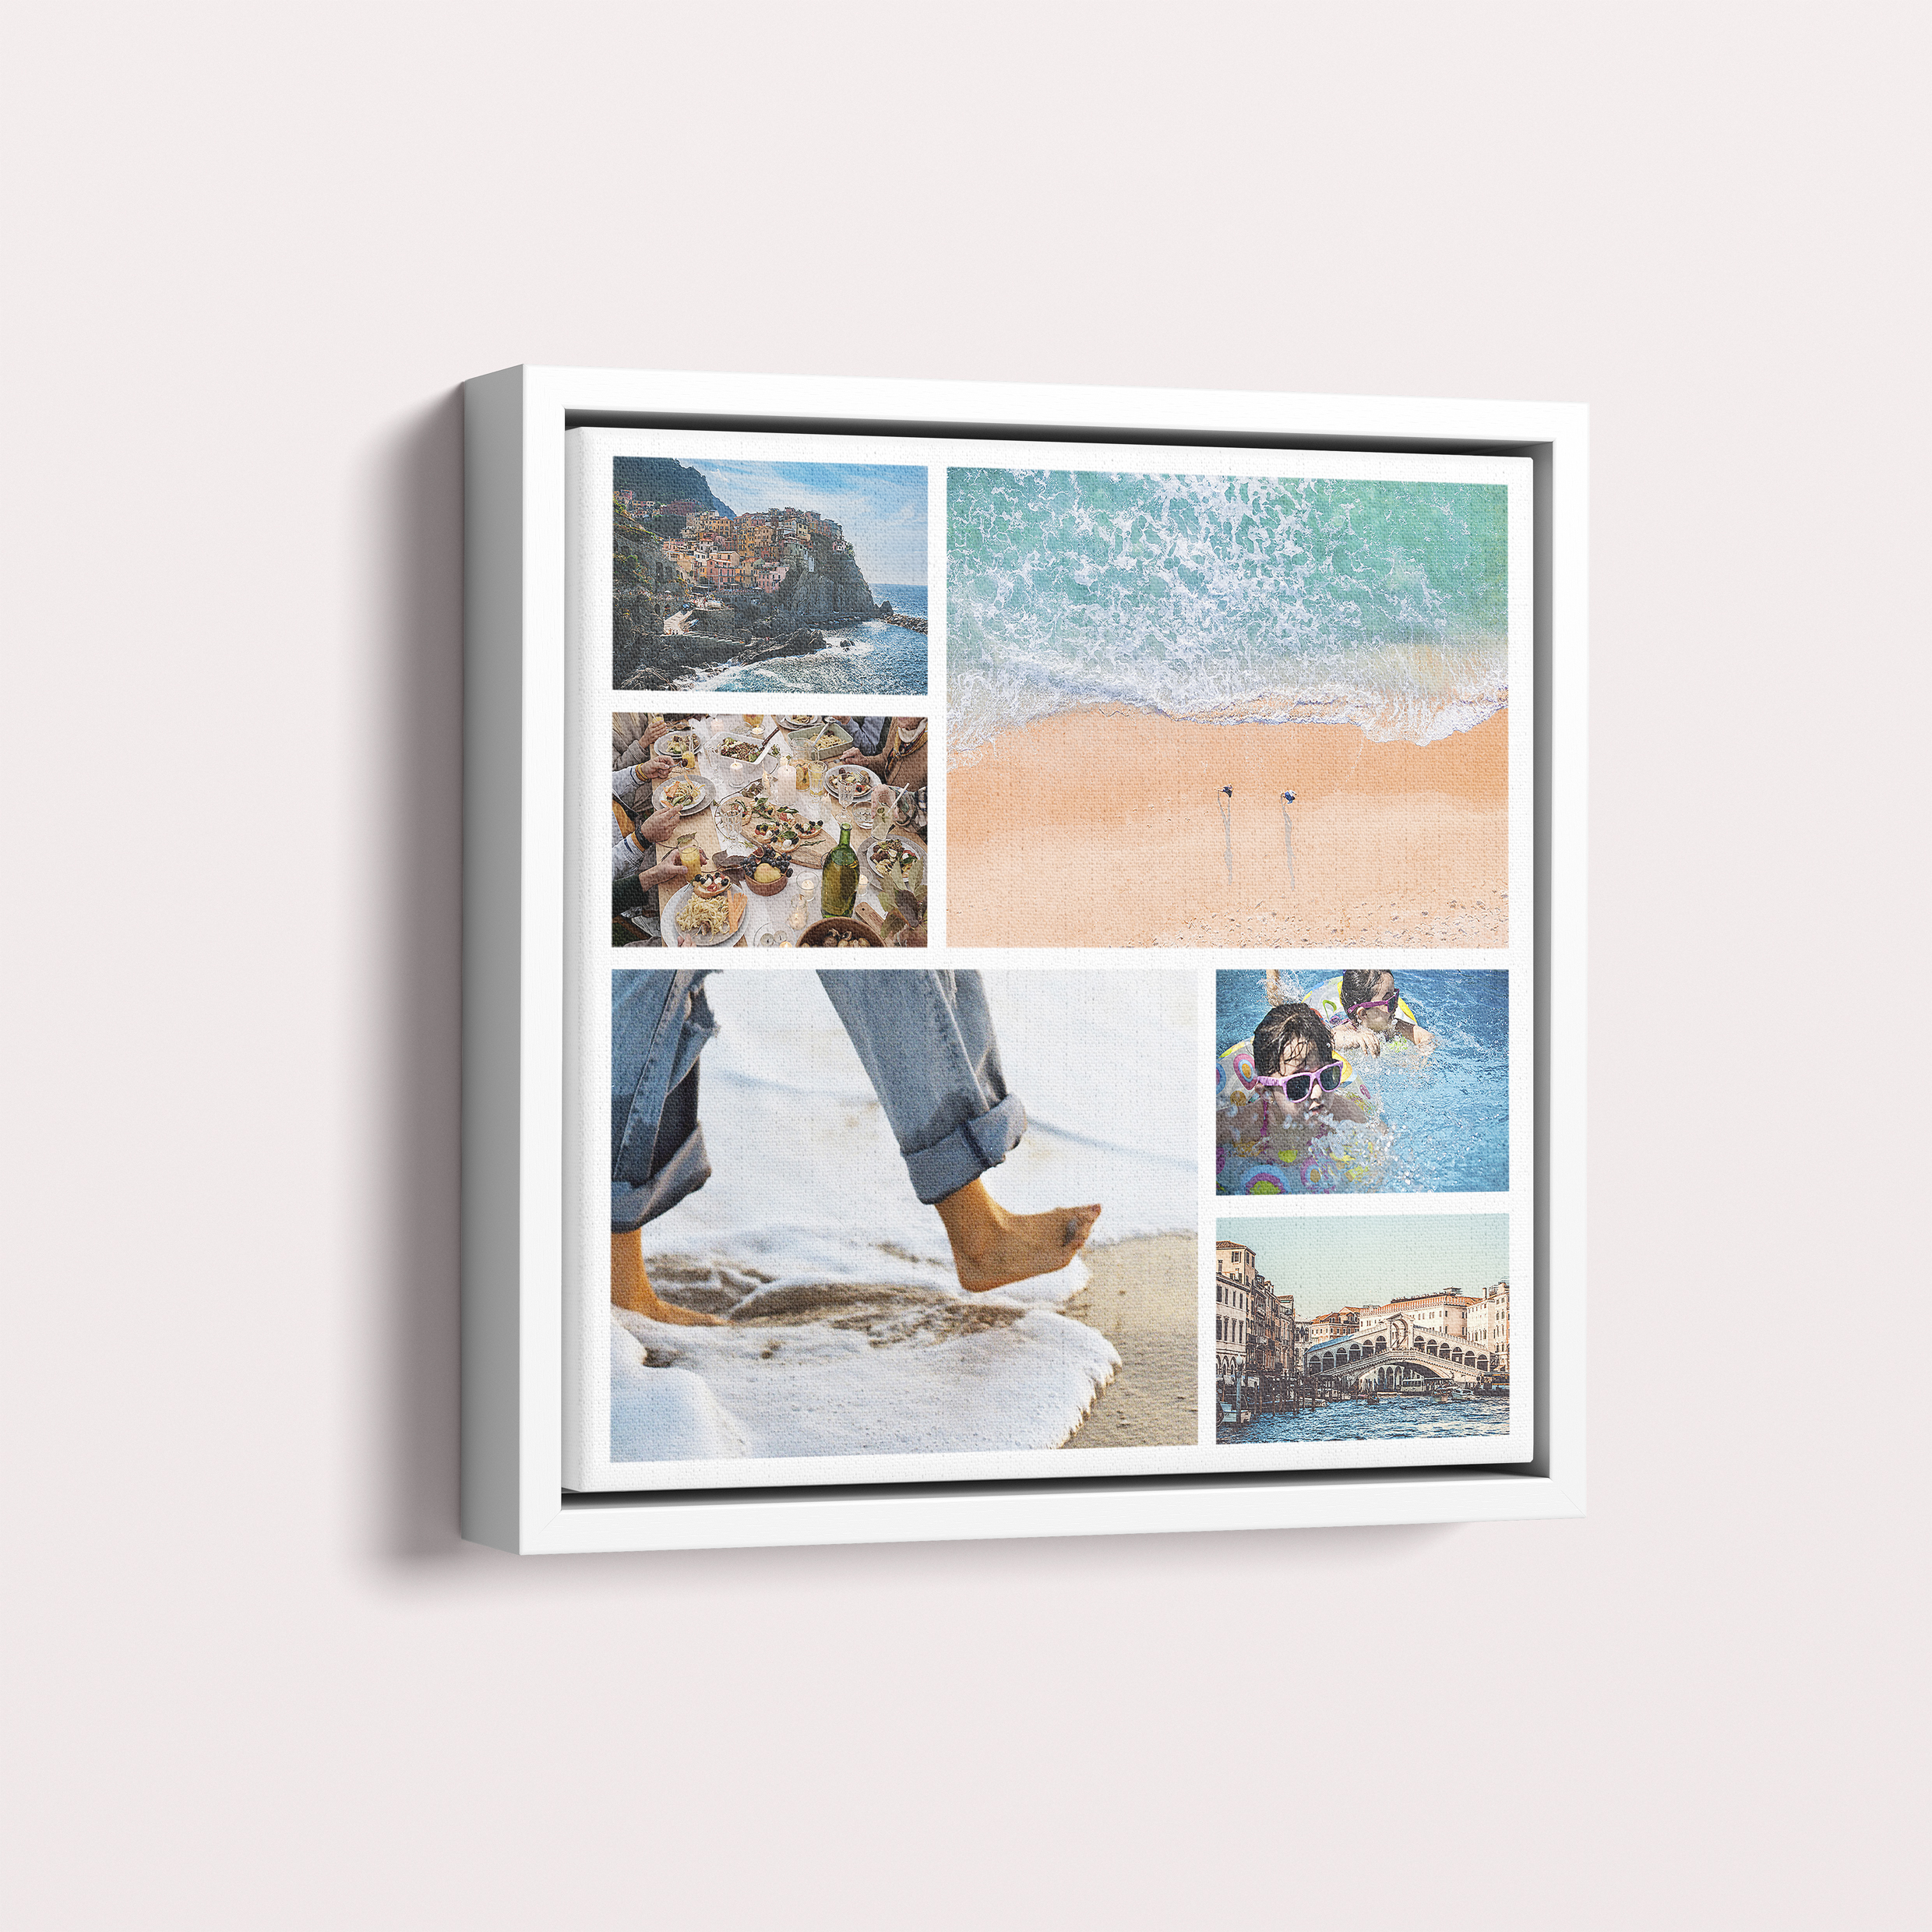 Festive Harmony Framed Photo Canvas - Transform 9 Cherished Memories into a Captivating Collage